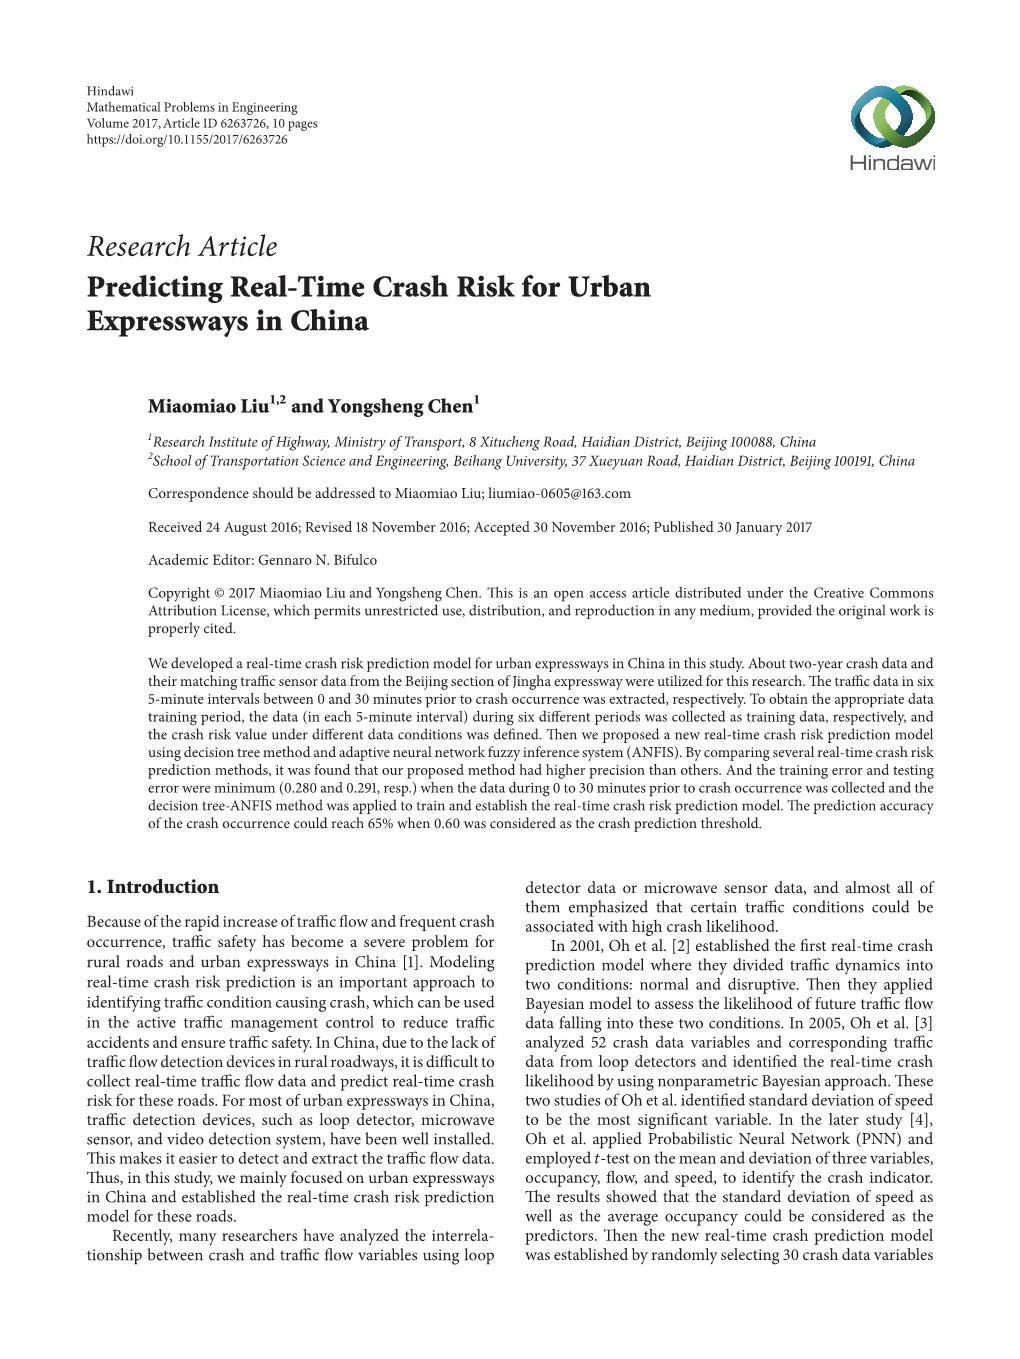 Research Article Predicting Real-Time Crash Risk for Urban Expressways in China